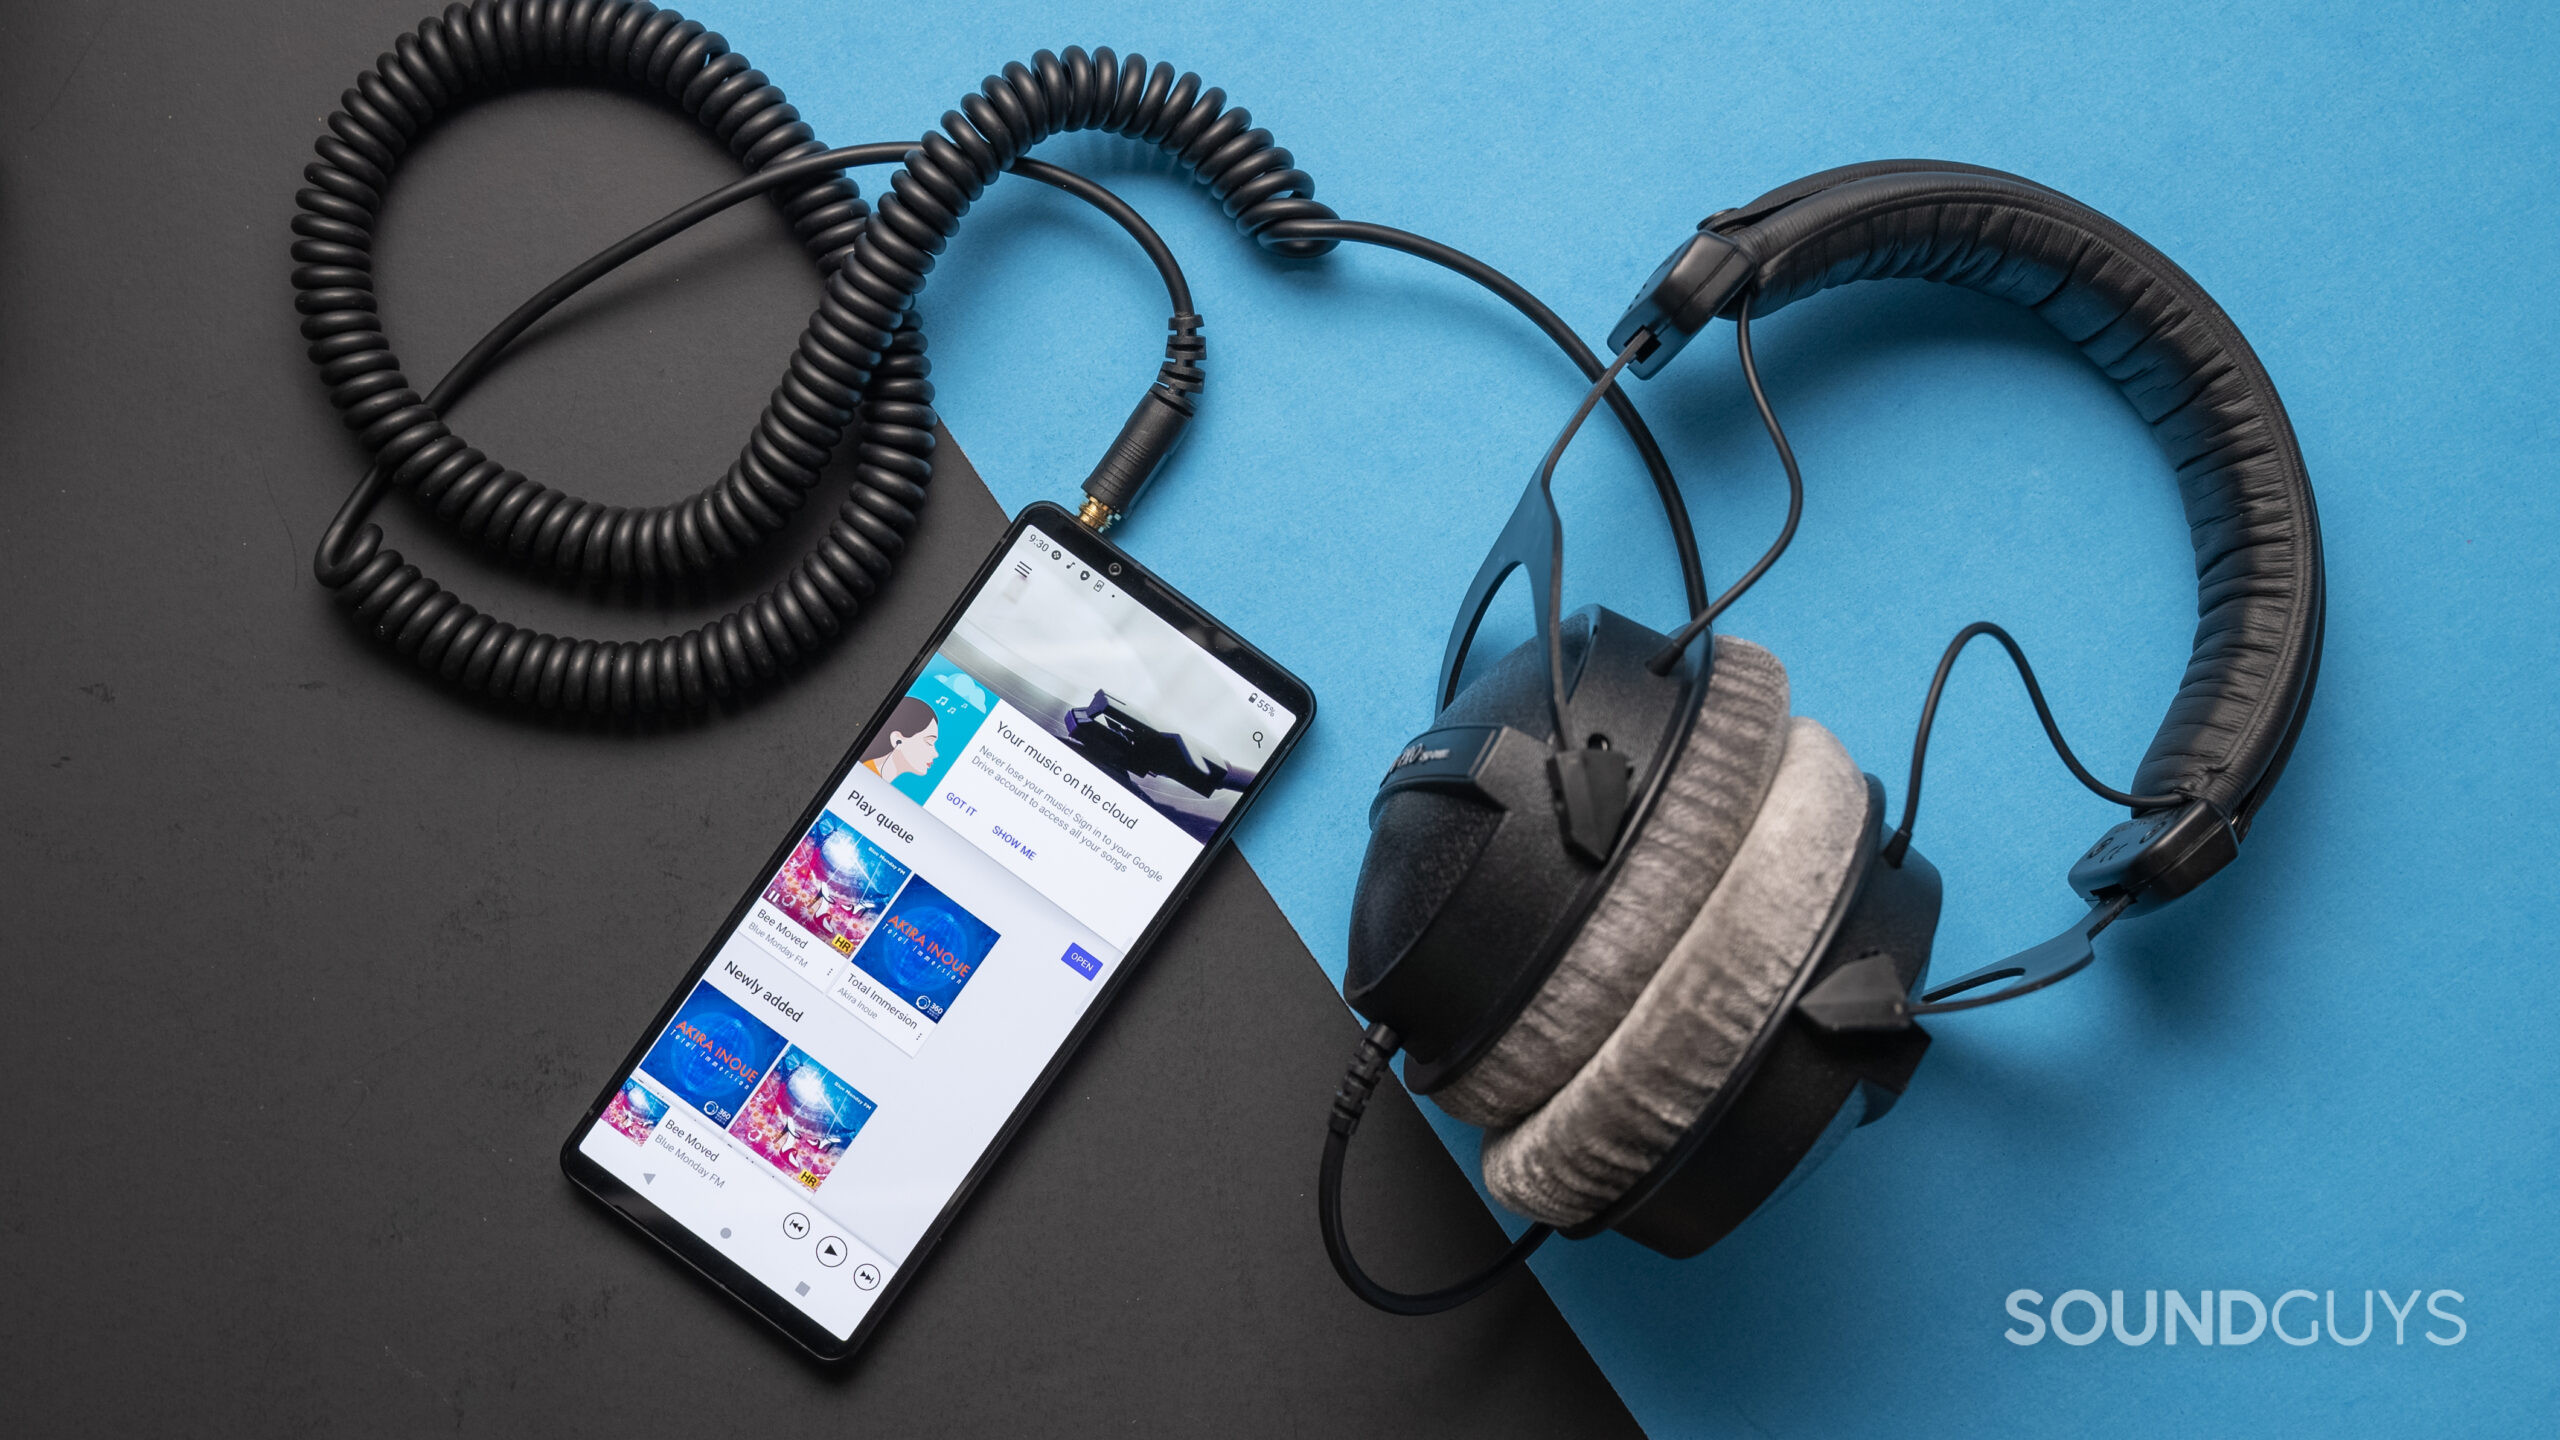 Image shows Sony Xperia 1 with a set of Beyerdynamic headphones.